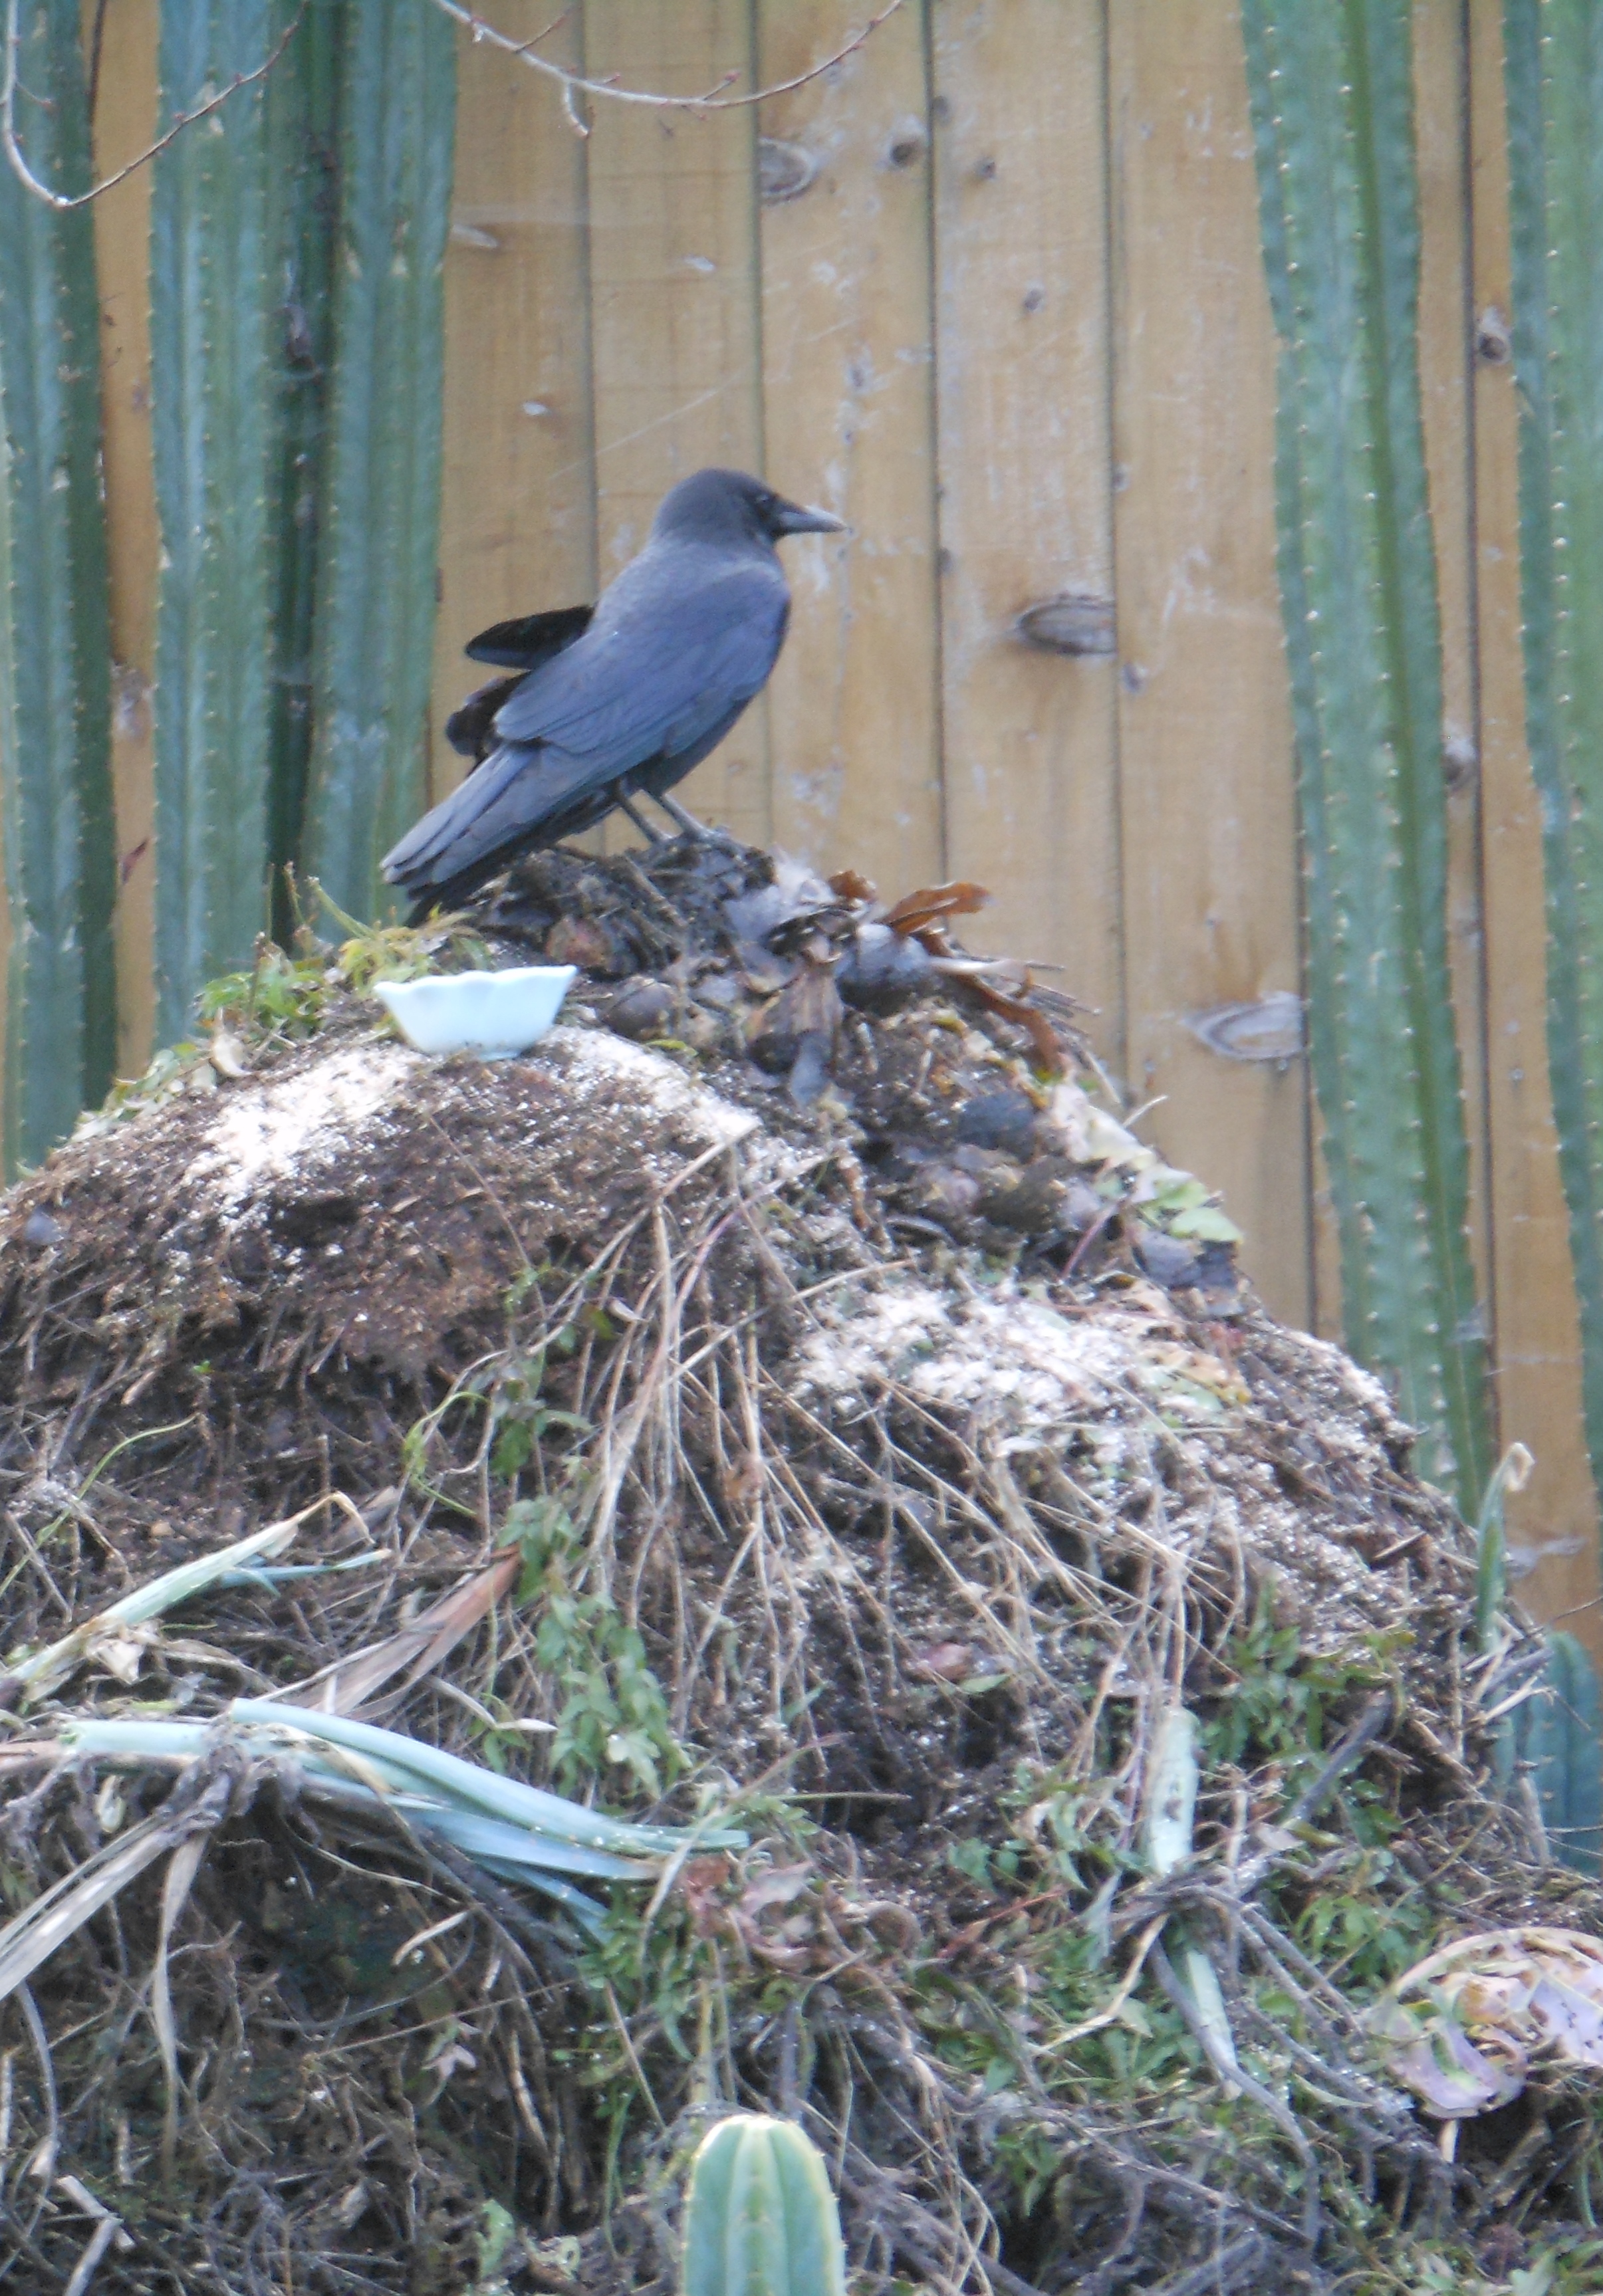 Wounded Crow on Compost Pile